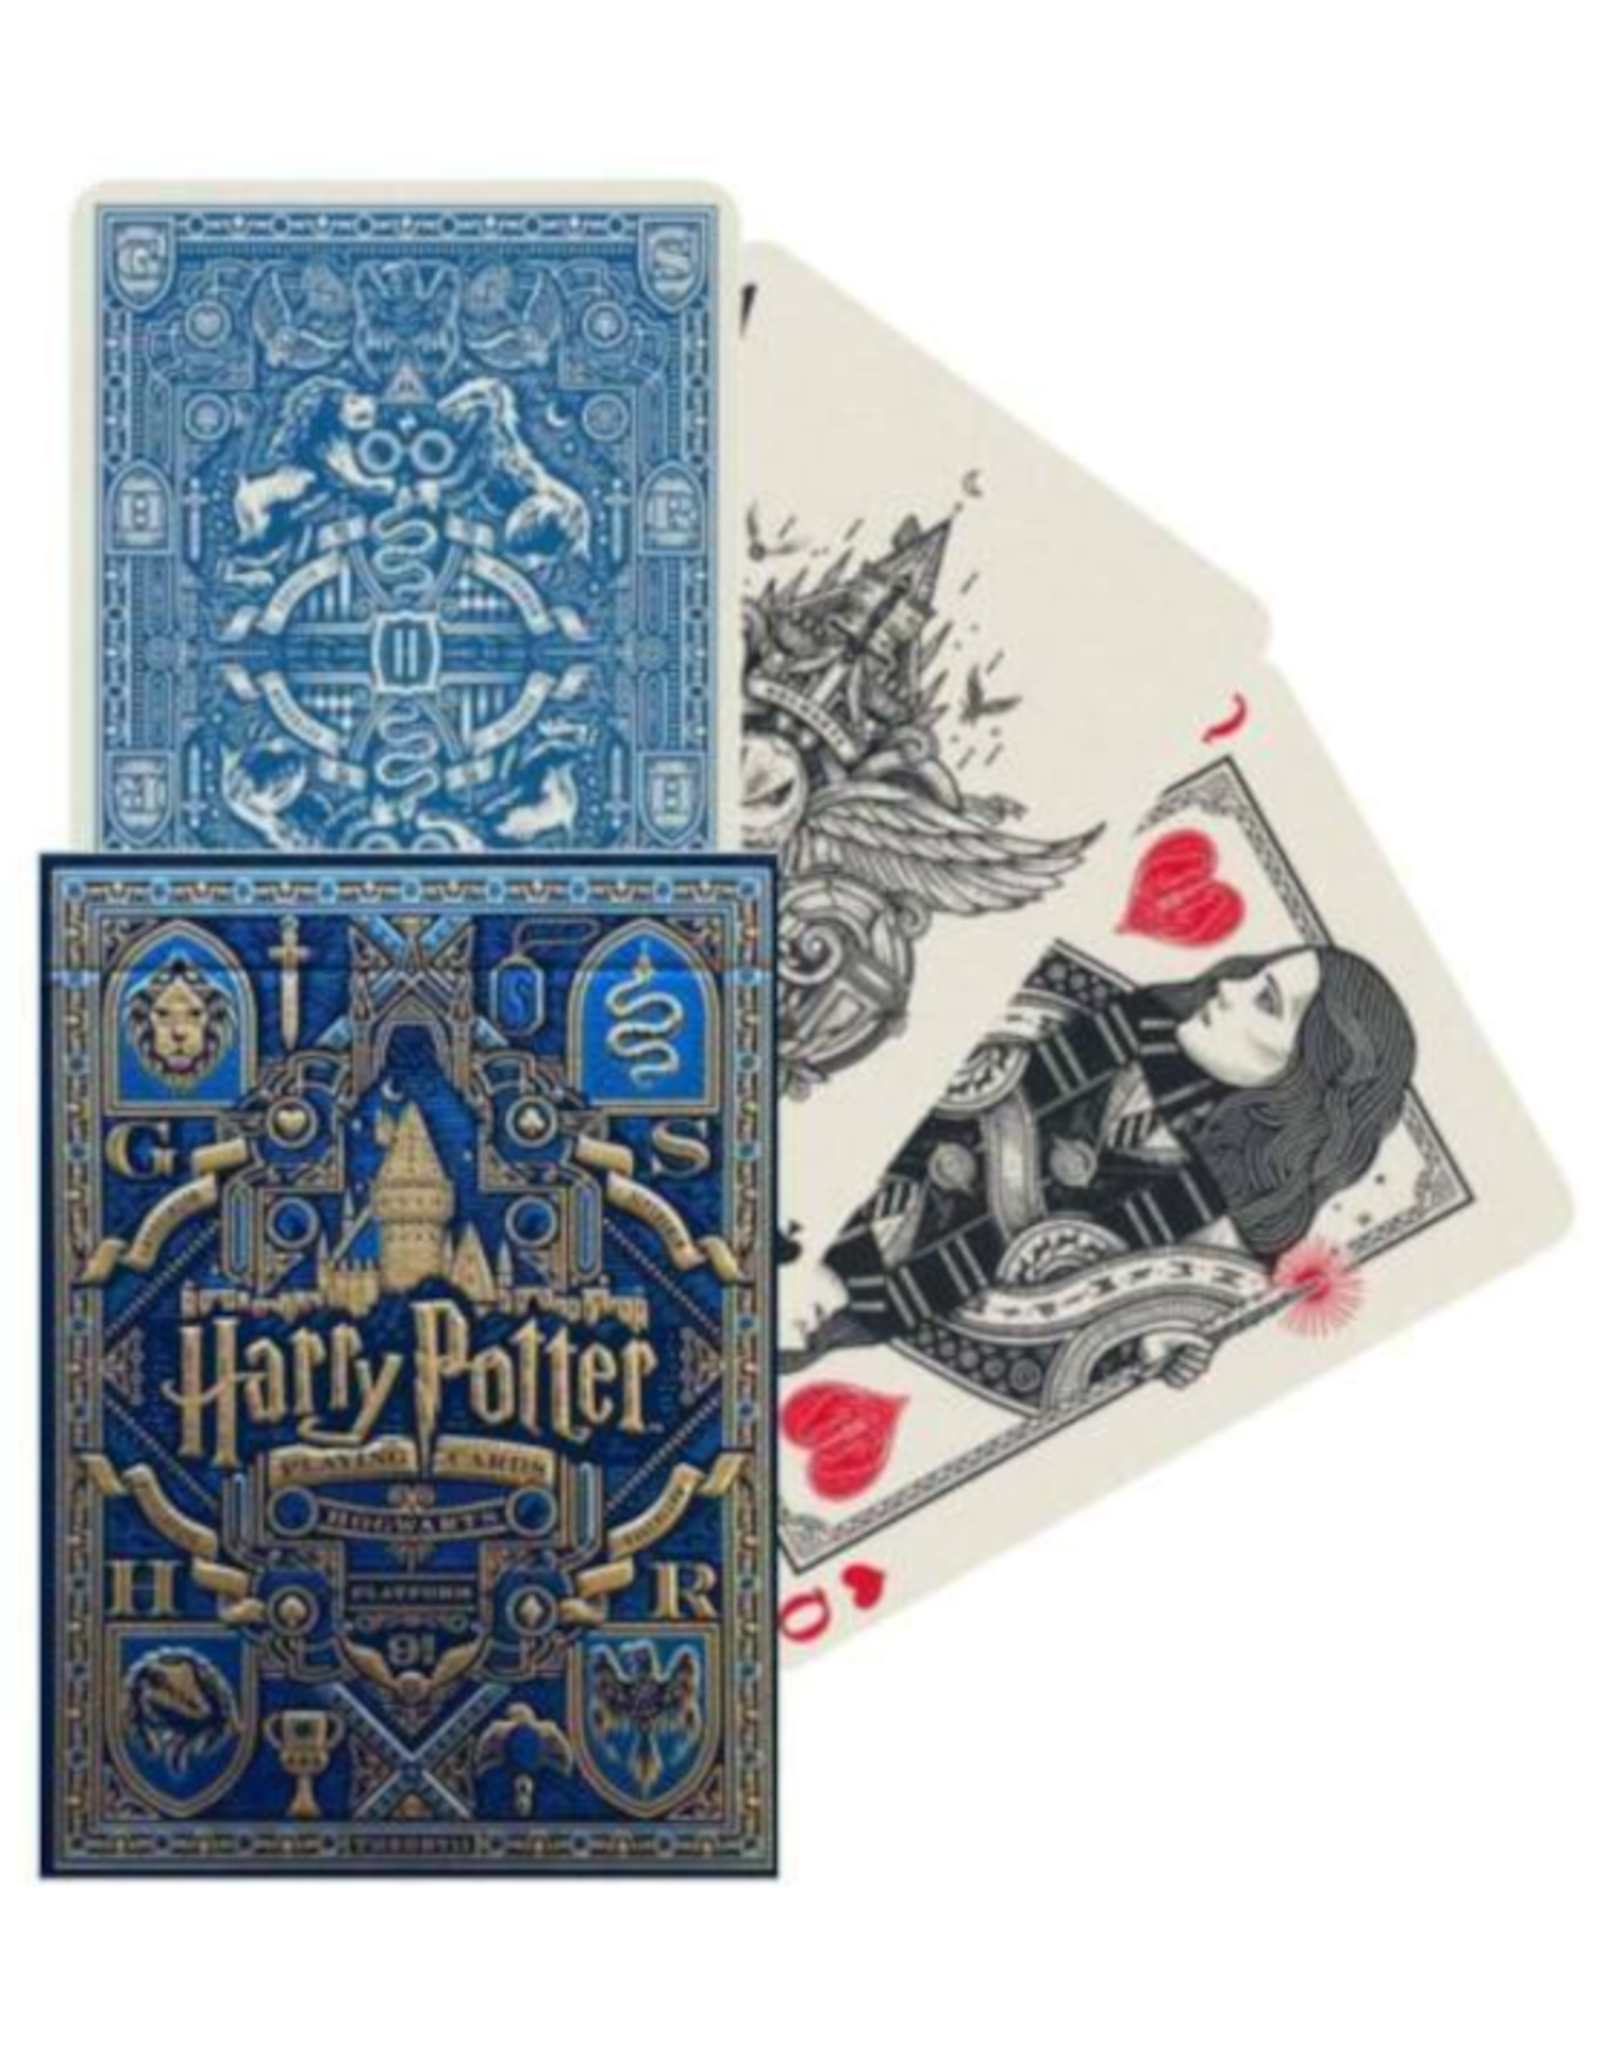 Theory 11 Theory 11 Playing Cards - Harry Potter